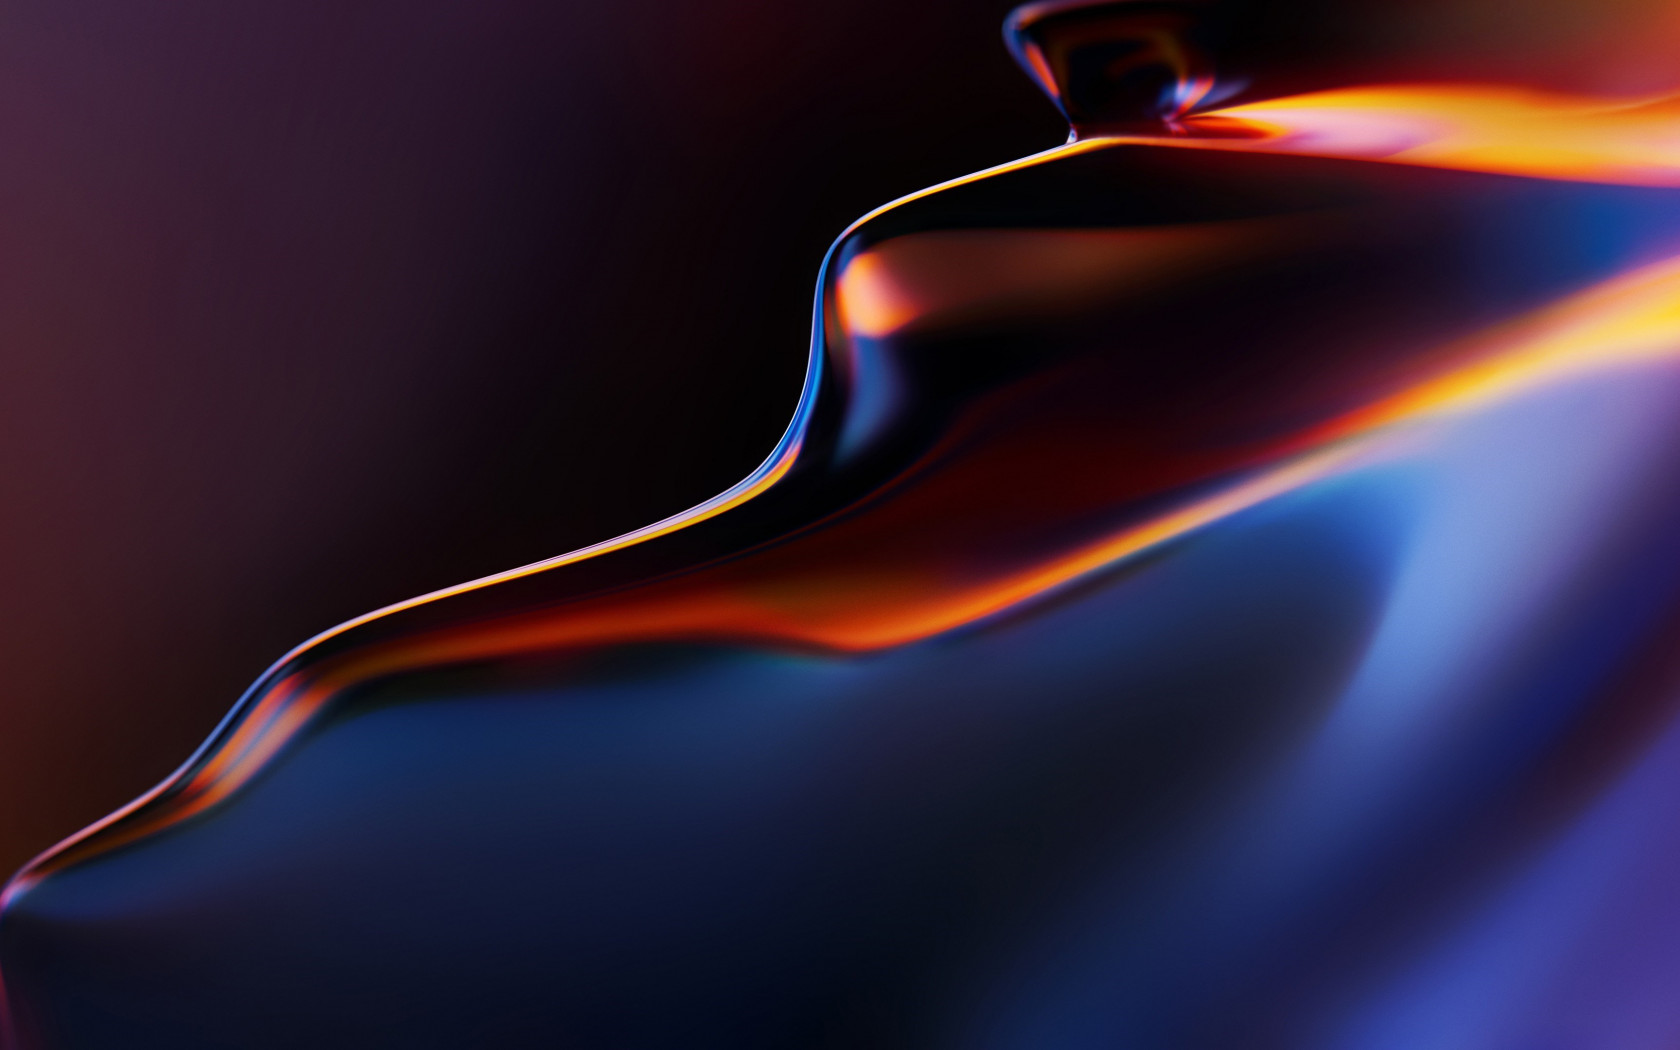 Abstract, flow, OnePlus 6T wallpaper 1680x1050